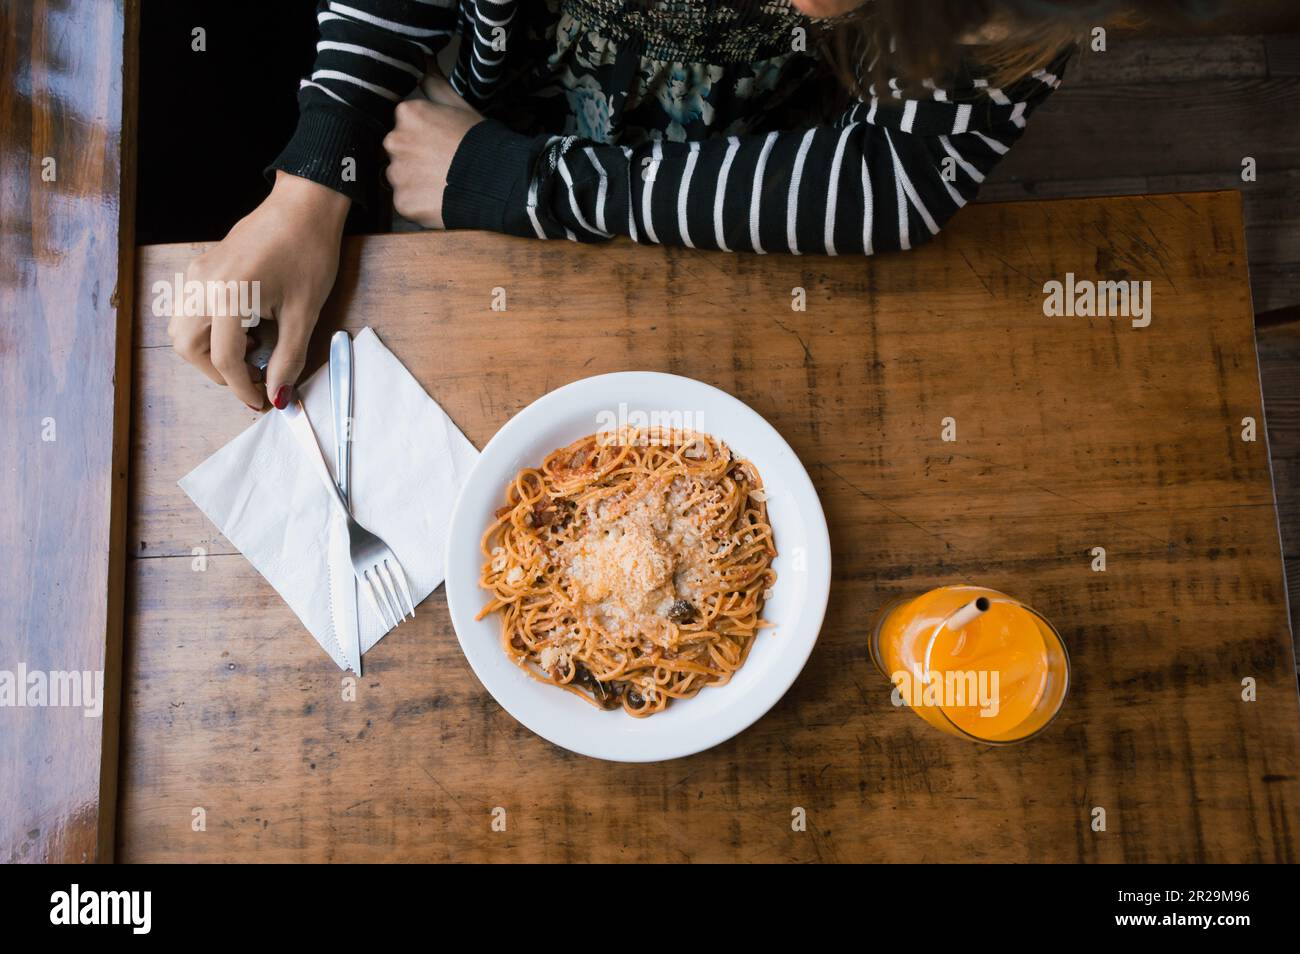 top view of unrecognizable person's arm on a table about to start eating a plate of spaghetti and an orange juice, restaurant concept, copy space. Stock Photo